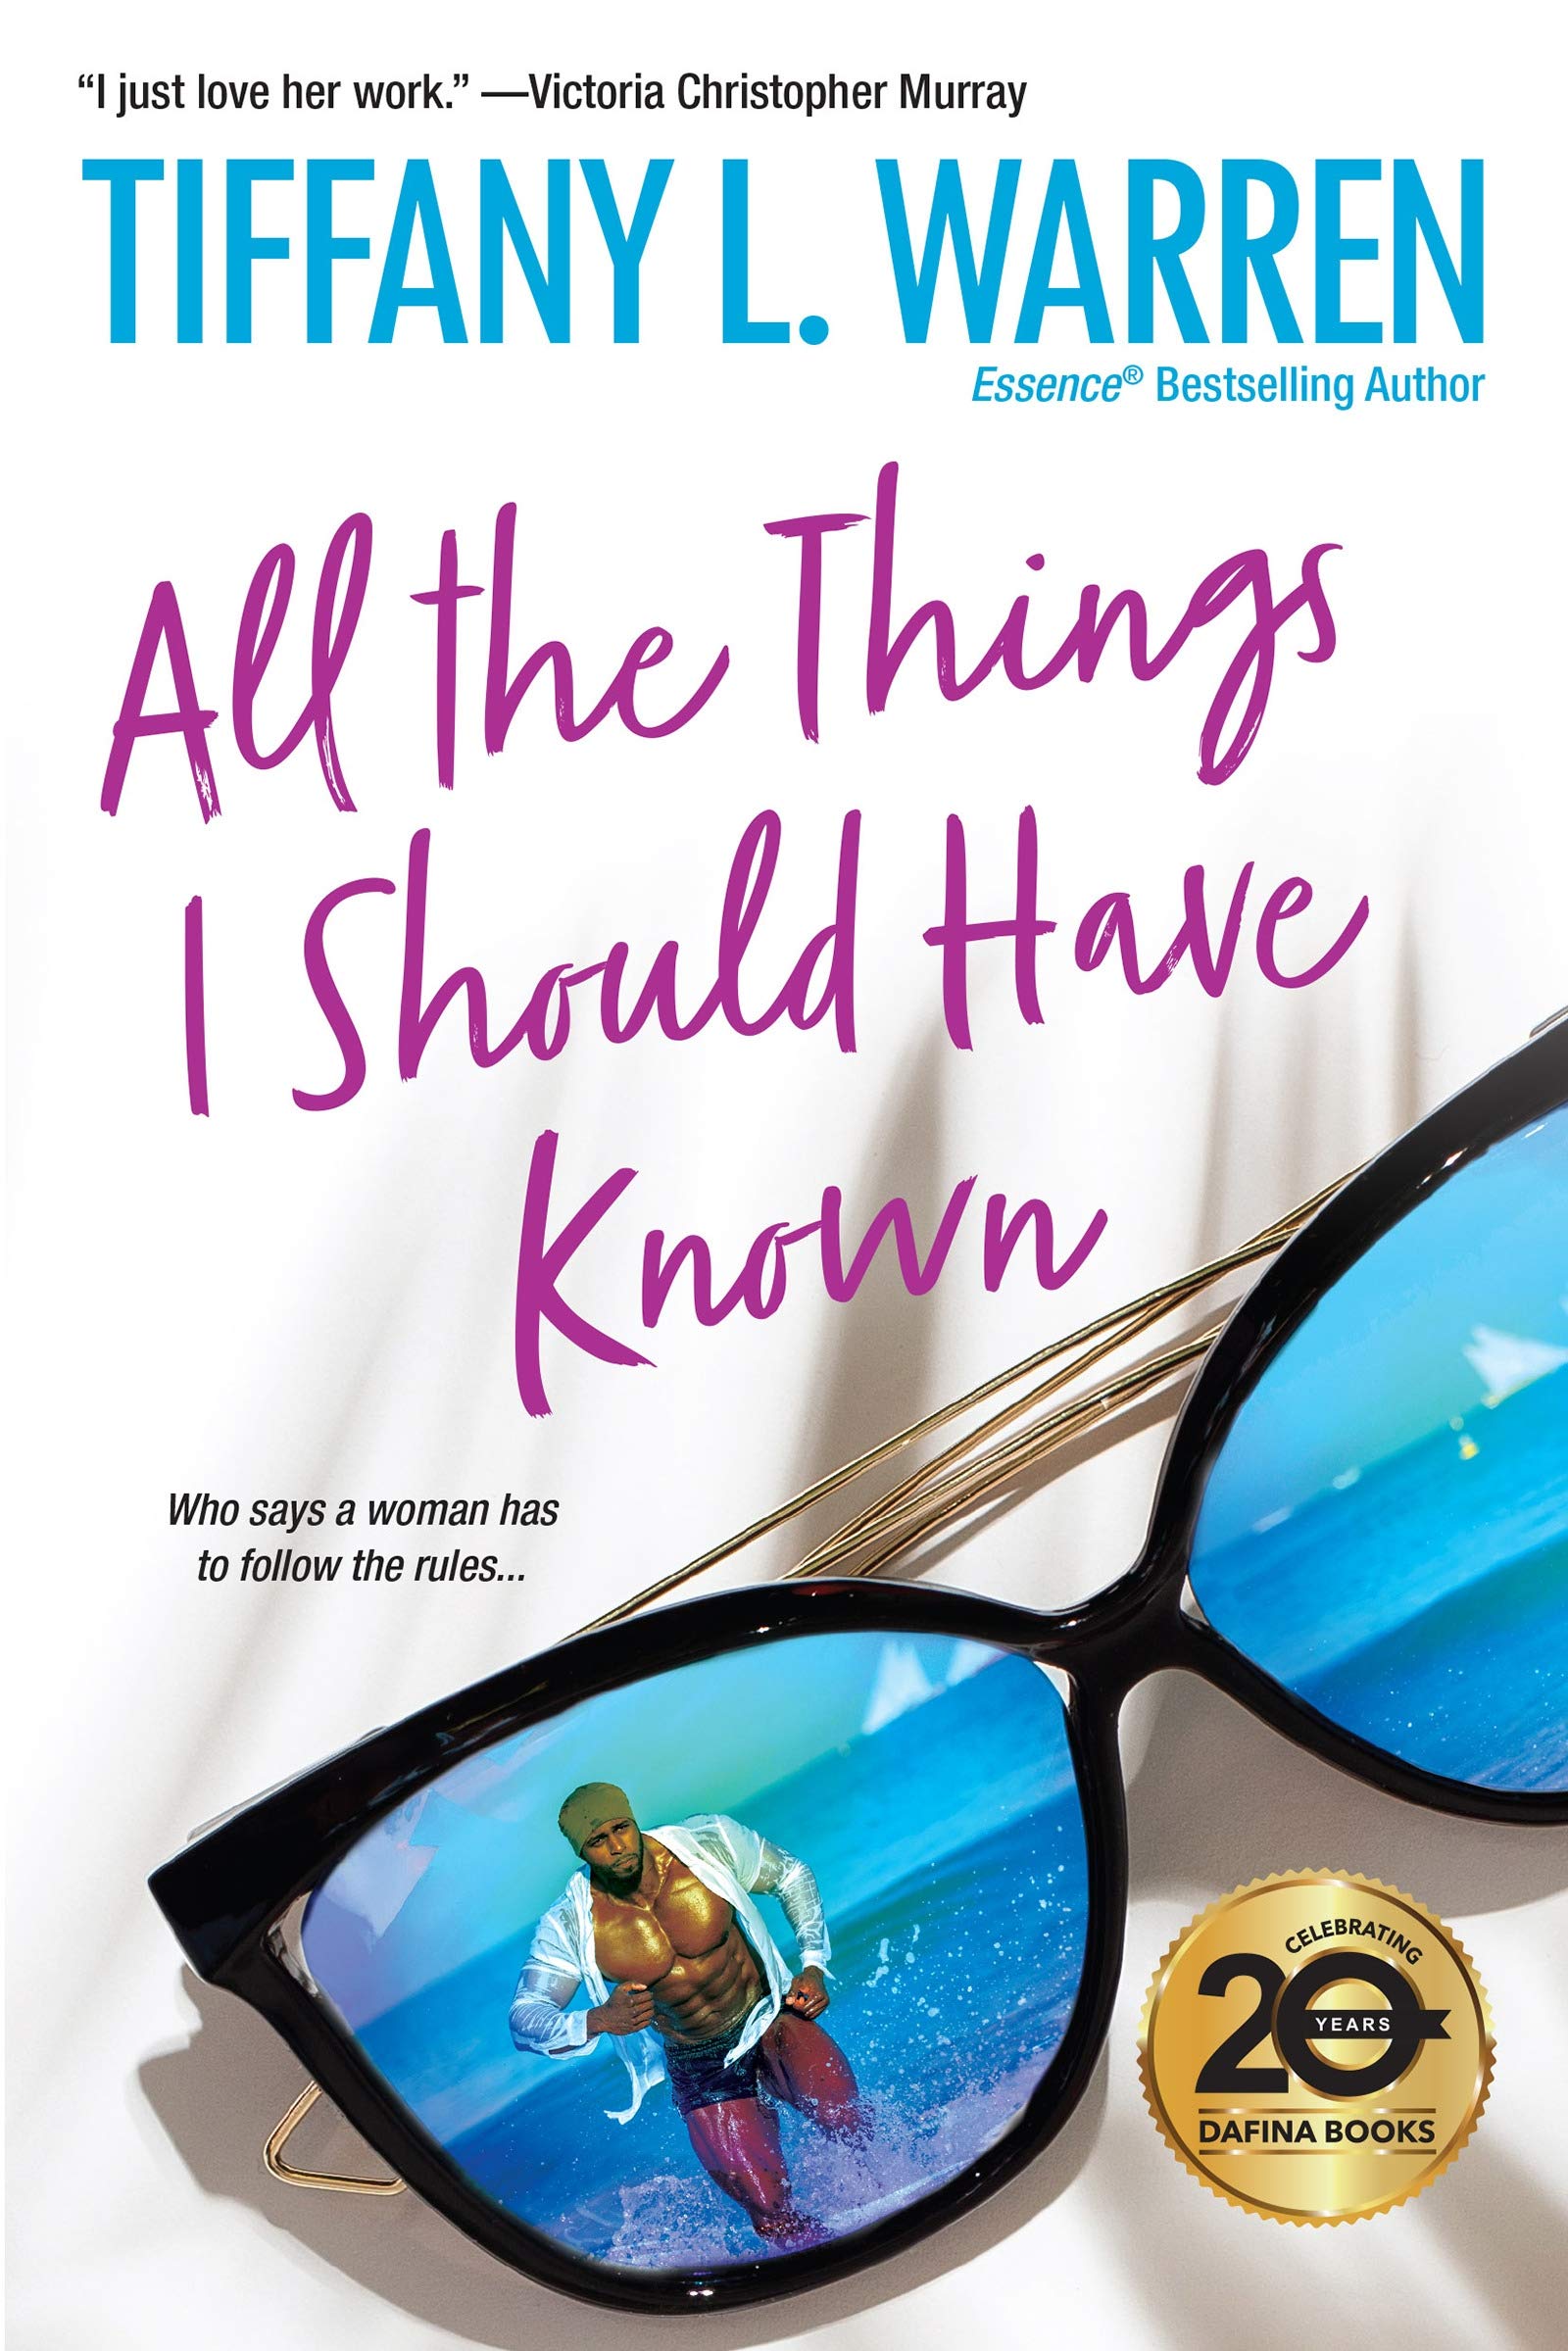 All the Things I Should Have Known by Tiffany Warren